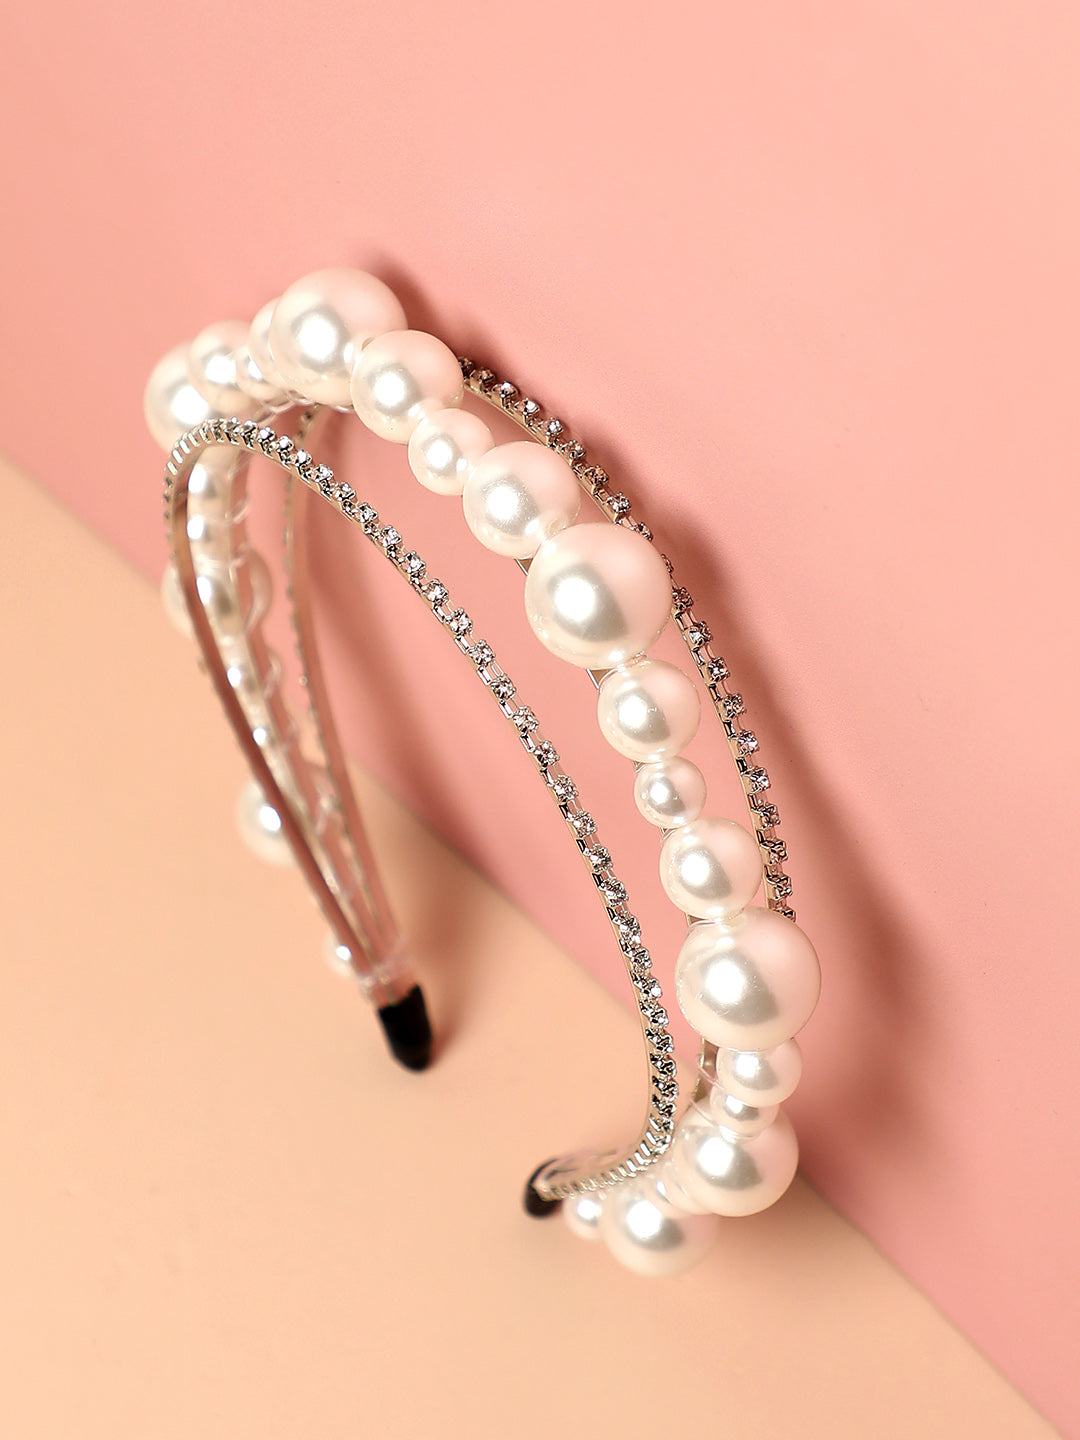 Glistening Charm: Accentuating Style With An Embellished Hairband